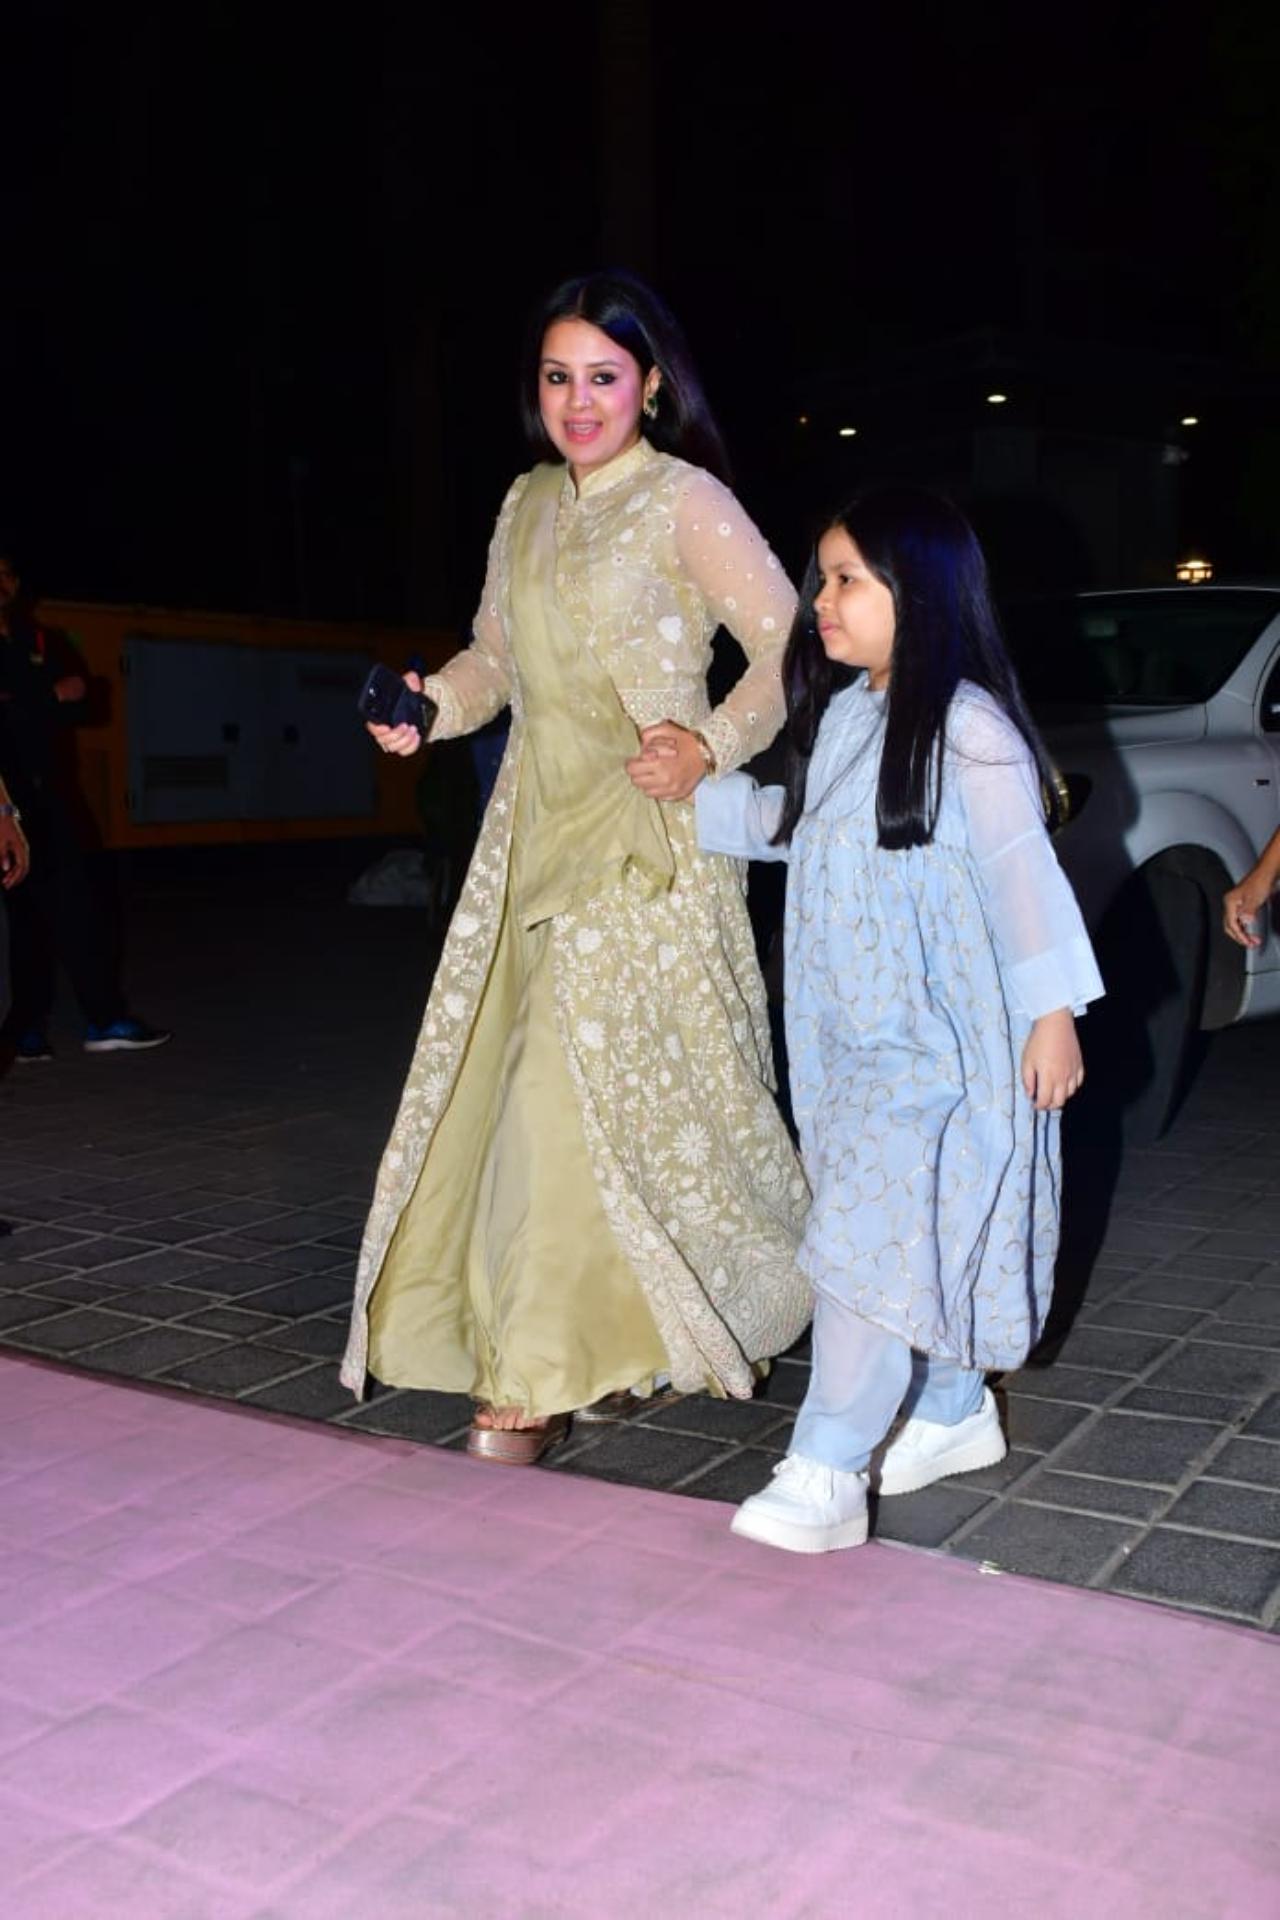 MS Dhoni's wife Sakshi Singh Dhoni and daughter Ziva were also seen at the party